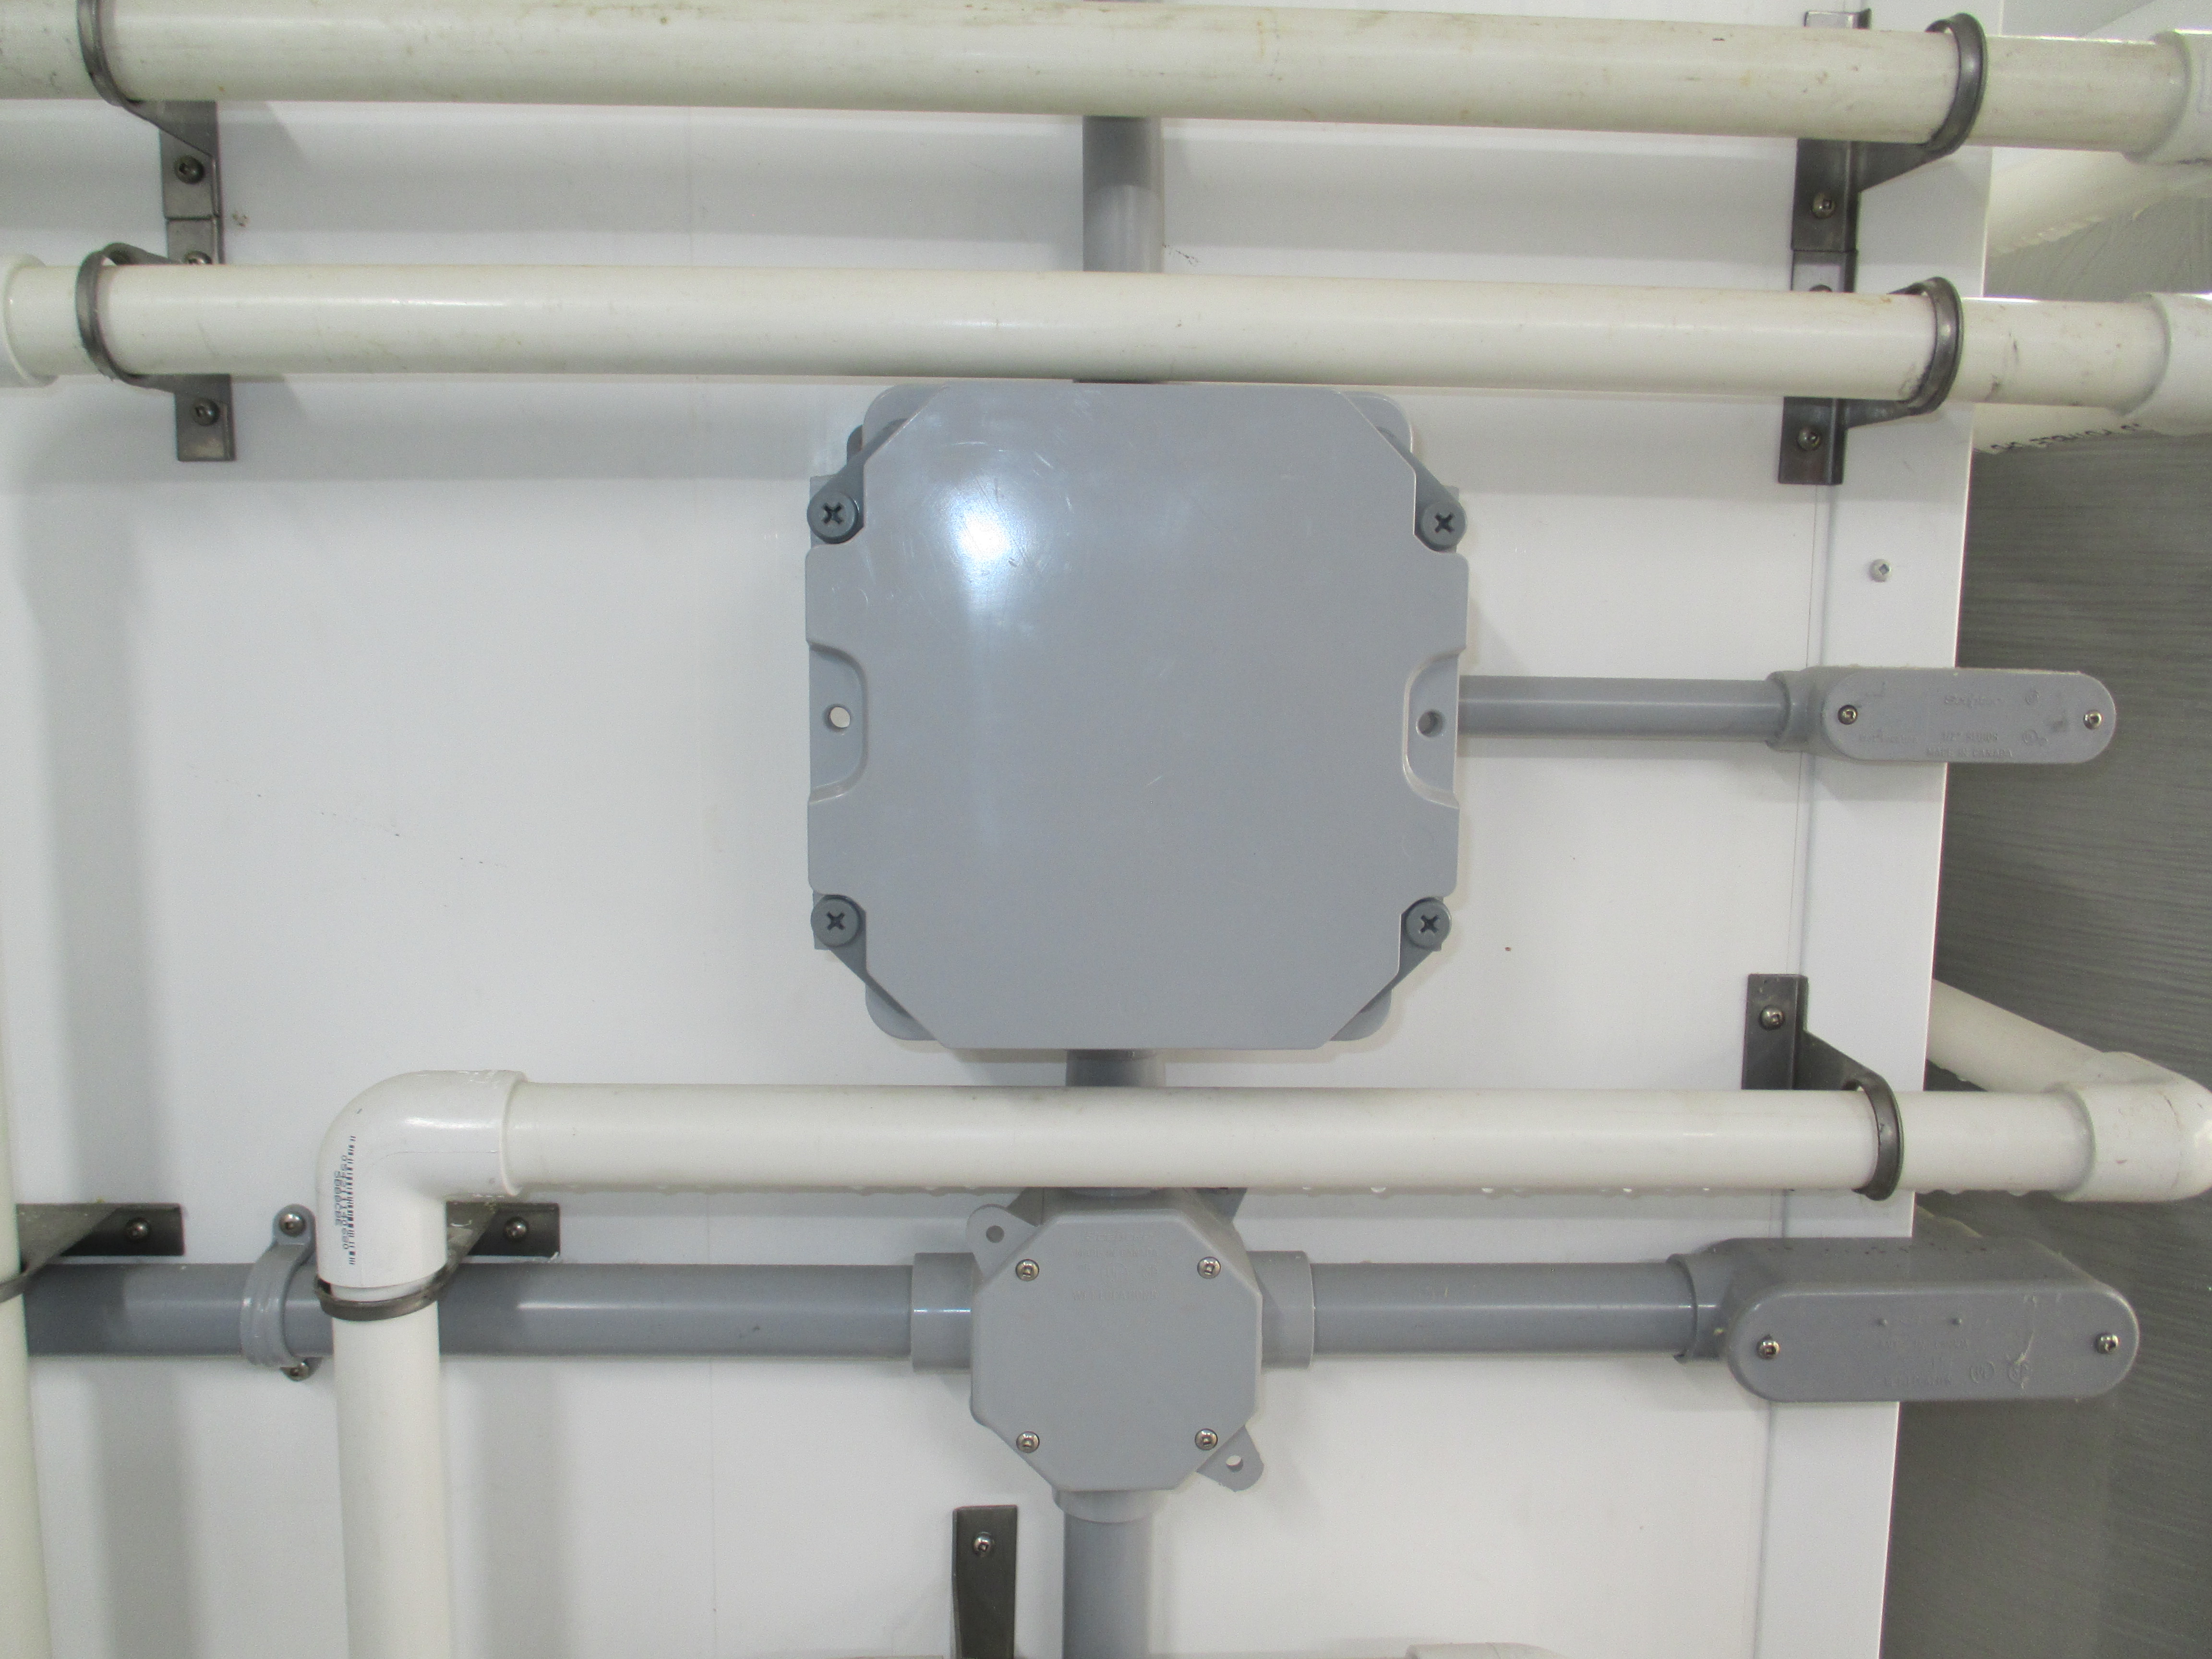 This is a photograph of a NEMA4X rated electrical enclosure mounted the wall of a barn. The enclosure is made out of grey plastic. There are no holes or vents in the enclosure that would allow moisture or corrosive gases to enter. The electrical wiring entering the enclosure is all housed in plastic conduit.